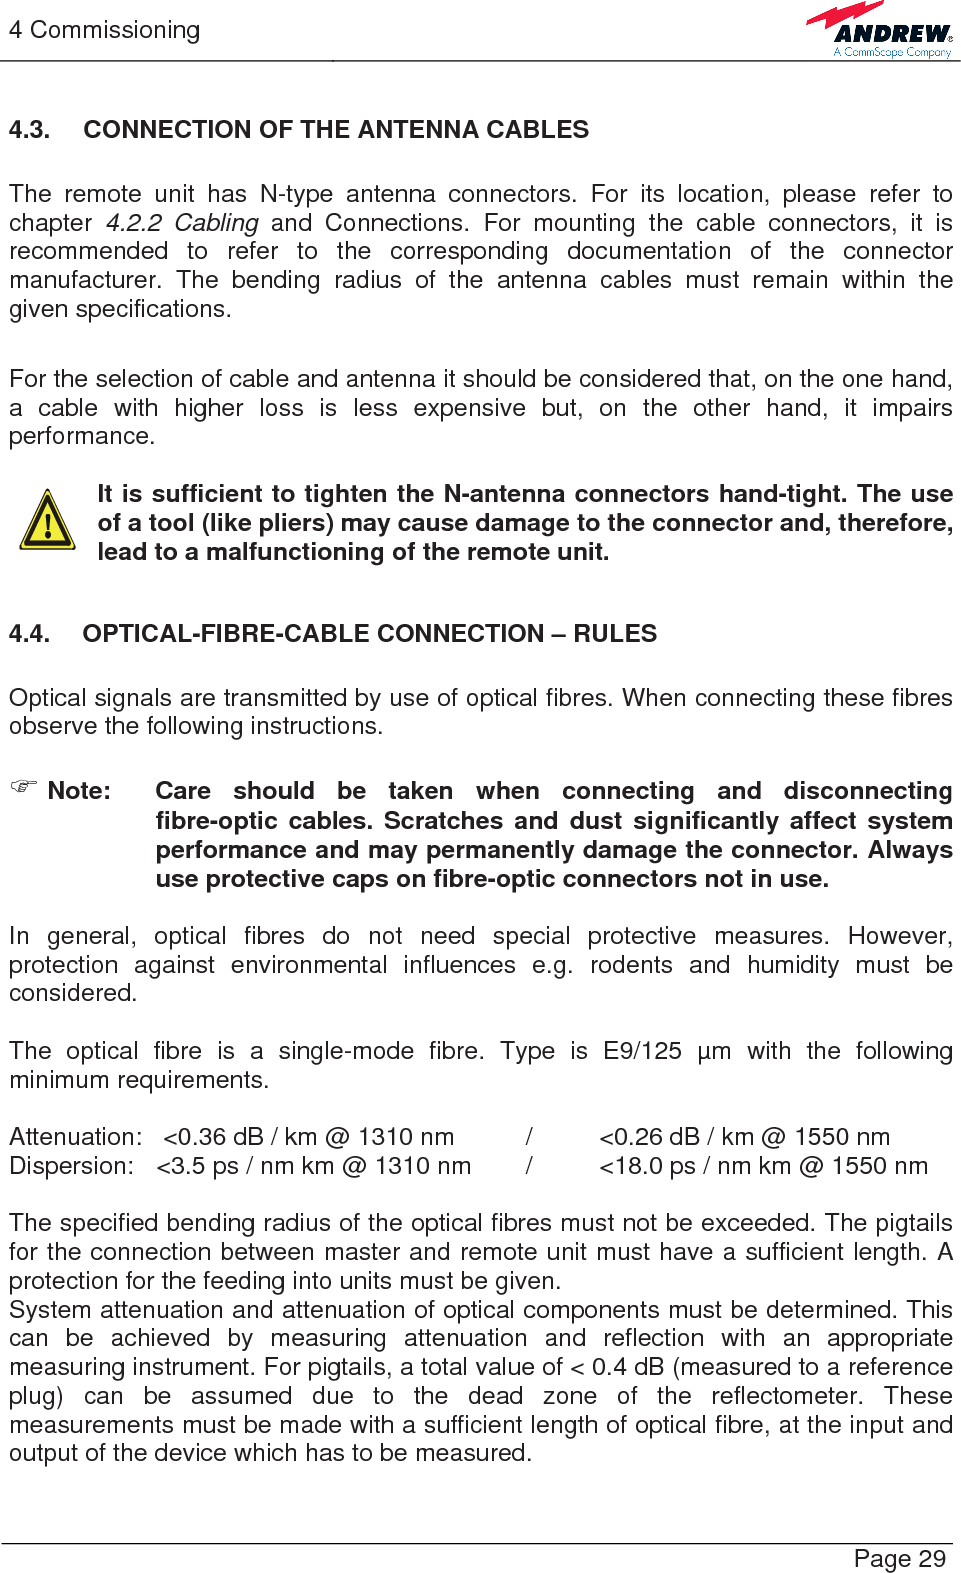 4 Commissioning   Page 29 4.3.  CONNECTION OF THE ANTENNA CABLES  The remote unit has N-type antenna connectors. For its location, please refer to chapter 4.2.2 Cabling and Connections. For mounting the cable connectors, it is recommended to refer to the corresponding documentation of the connector manufacturer. The bending radius of the antenna cables must remain within the given specifications.   For the selection of cable and antenna it should be considered that, on the one hand, a cable with higher loss is less expensive but, on the other hand, it impairs performance.   It is sufficient to tighten the N-antenna connectors hand-tight. The use of a tool (like pliers) may cause damage to the connector and, therefore, lead to a malfunctioning of the remote unit.  4.4.  OPTICAL-FIBRE-CABLE CONNECTION – RULES  Optical signals are transmitted by use of optical fibres. When connecting these fibres observe the following instructions.   ) Note:  Care should be taken when connecting and disconnecting fibre-optic cables. Scratches and dust significantly affect system performance and may permanently damage the connector. Always use protective caps on fibre-optic connectors not in use.  In general, optical fibres do not need special protective measures. However, protection against environmental influences e.g. rodents and humidity must be considered.  The optical fibre is a single-mode fibre. Type is E9/125 µm with the following minimum requirements.  Attenuation:   &lt;0.36 dB / km @ 1310 nm  /  &lt;0.26 dB / km @ 1550 nm Dispersion:  &lt;3.5 ps / nm km @ 1310 nm  /  &lt;18.0 ps / nm km @ 1550 nm  The specified bending radius of the optical fibres must not be exceeded. The pigtails for the connection between master and remote unit must have a sufficient length. A protection for the feeding into units must be given.  System attenuation and attenuation of optical components must be determined. This can be achieved by measuring attenuation and reflection with an appropriate measuring instrument. For pigtails, a total value of &lt; 0.4 dB (measured to a reference plug) can be assumed due to the dead zone of the reflectometer. These measurements must be made with a sufficient length of optical fibre, at the input and output of the device which has to be measured.  